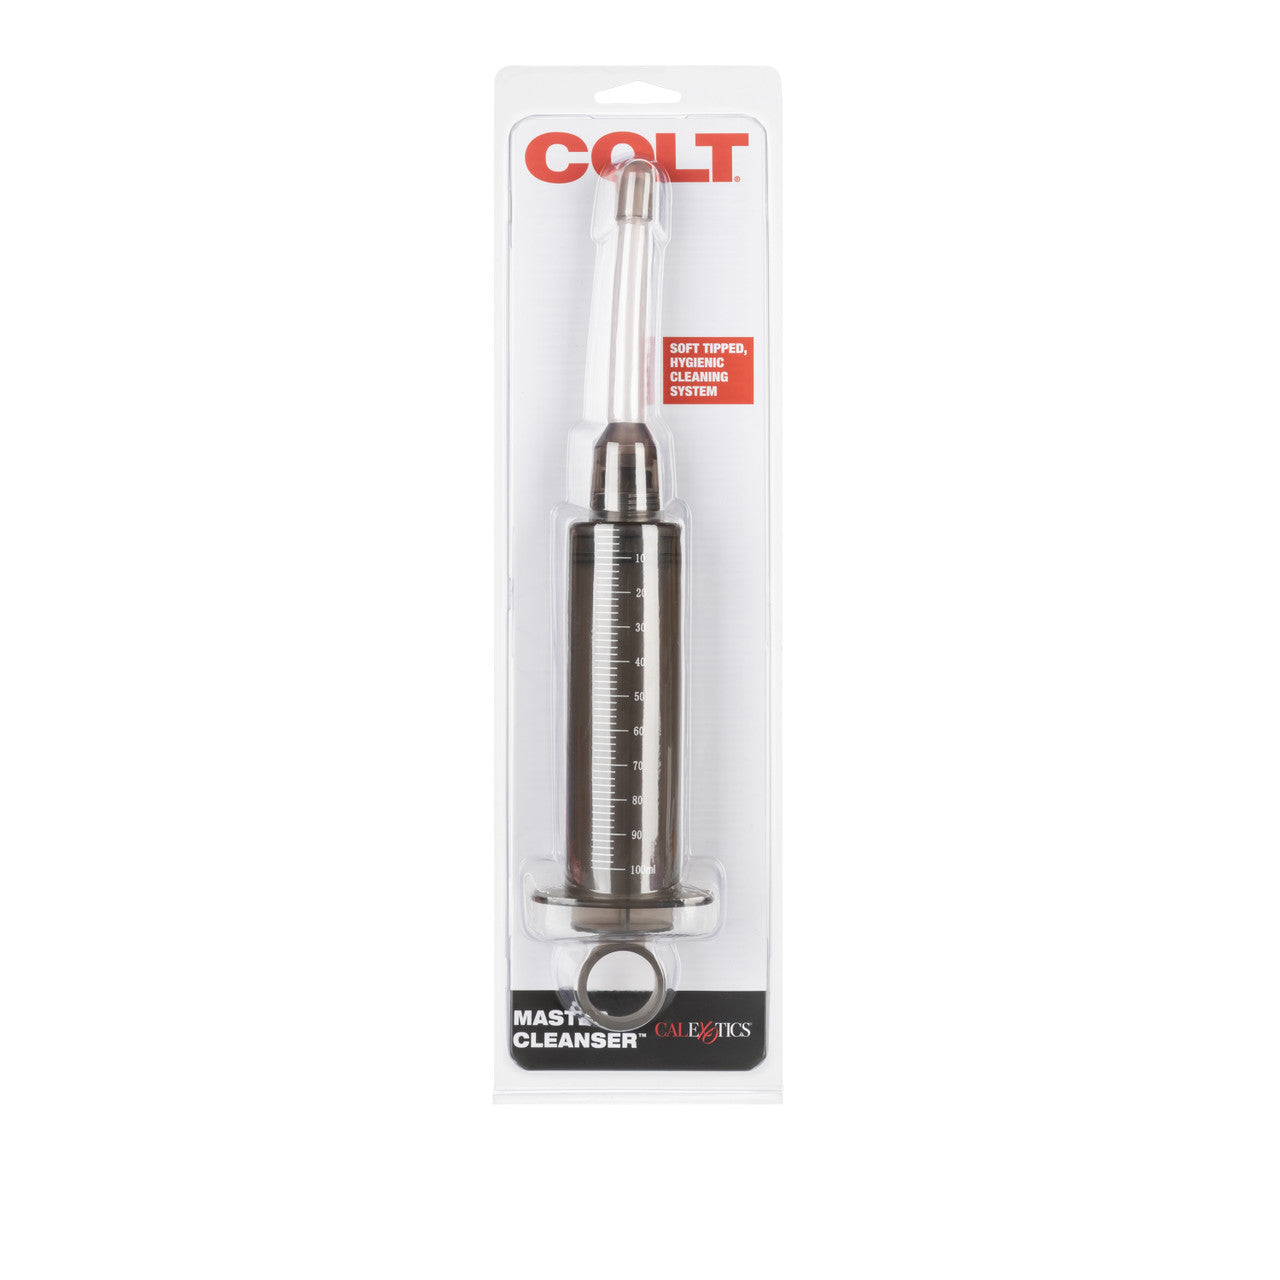 Colt Master Cleanser - 3.5oz/100ml - Thorn & Feather Sex Toy Canada